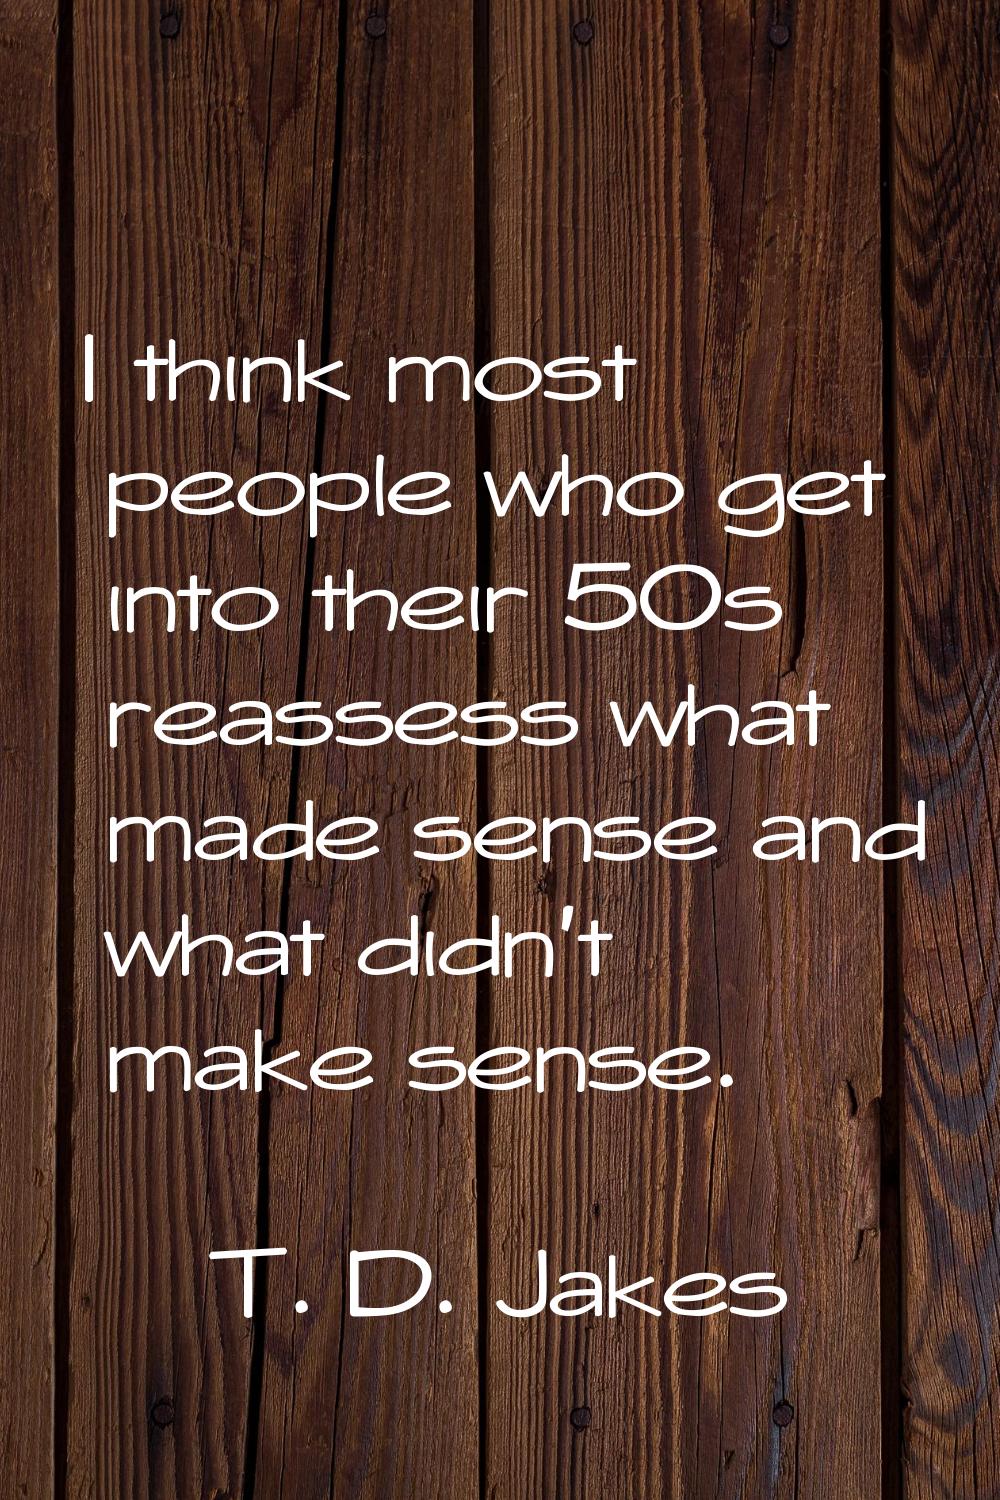 I think most people who get into their 50s reassess what made sense and what didn't make sense.